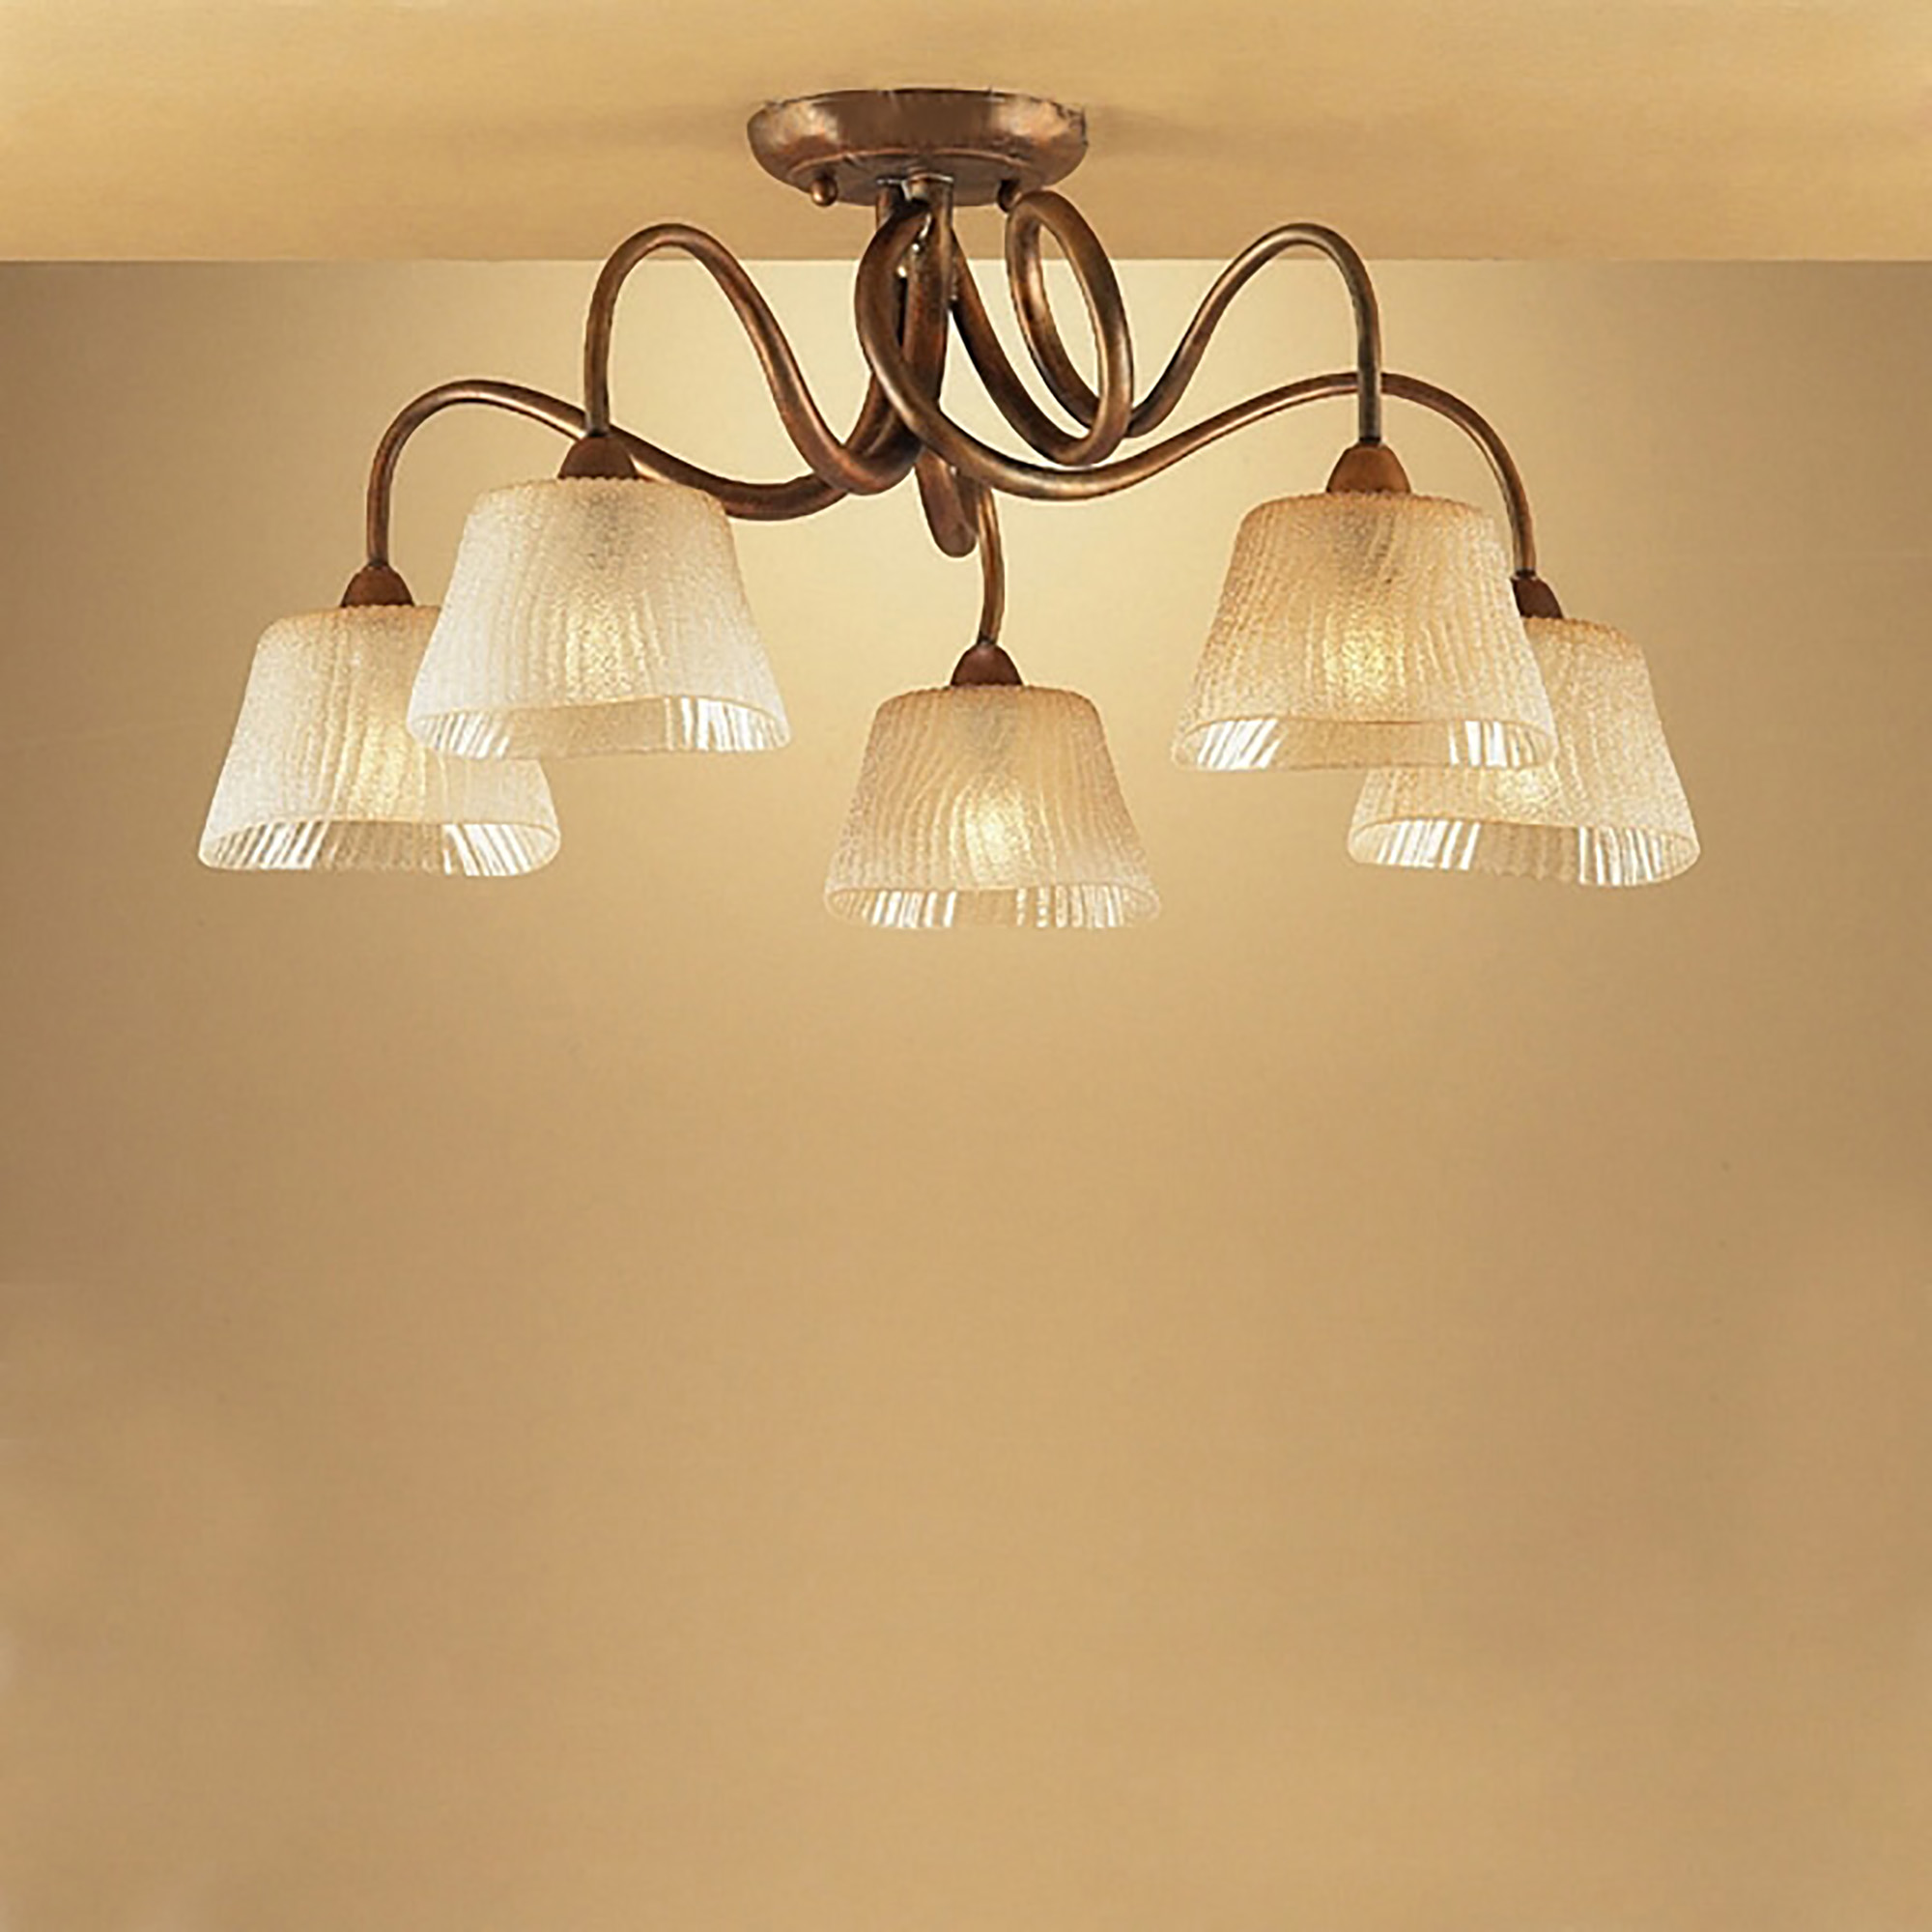 Tentacle Ceiling Lights Mantra Semi Flush Fittings